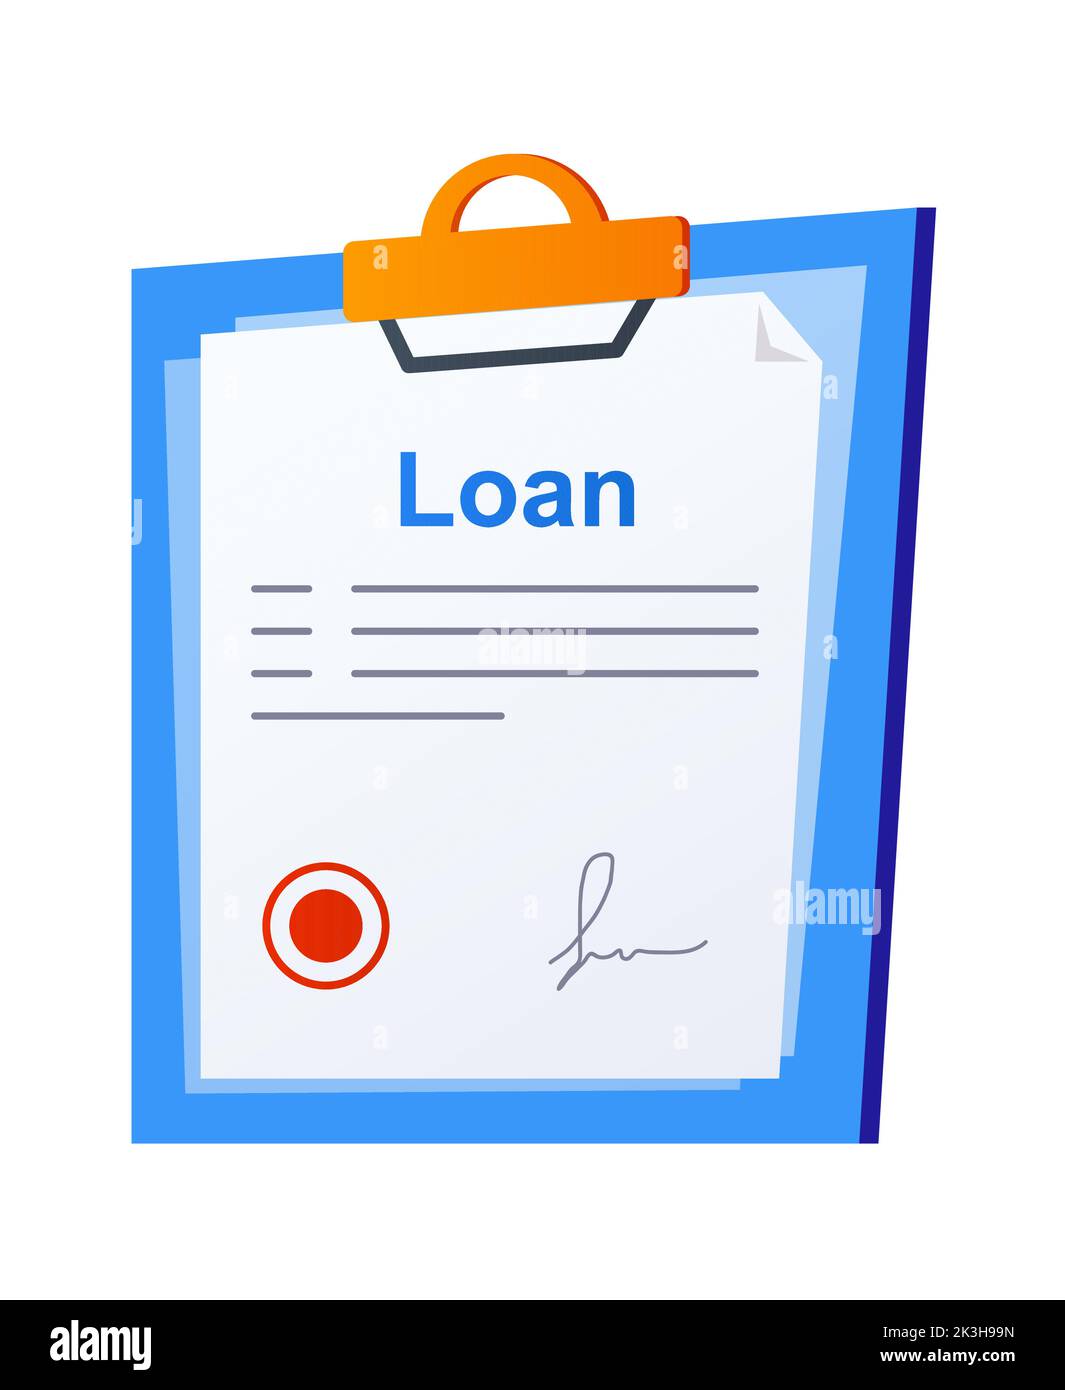 Loan - modern flat design style single isolated image Stock Vector